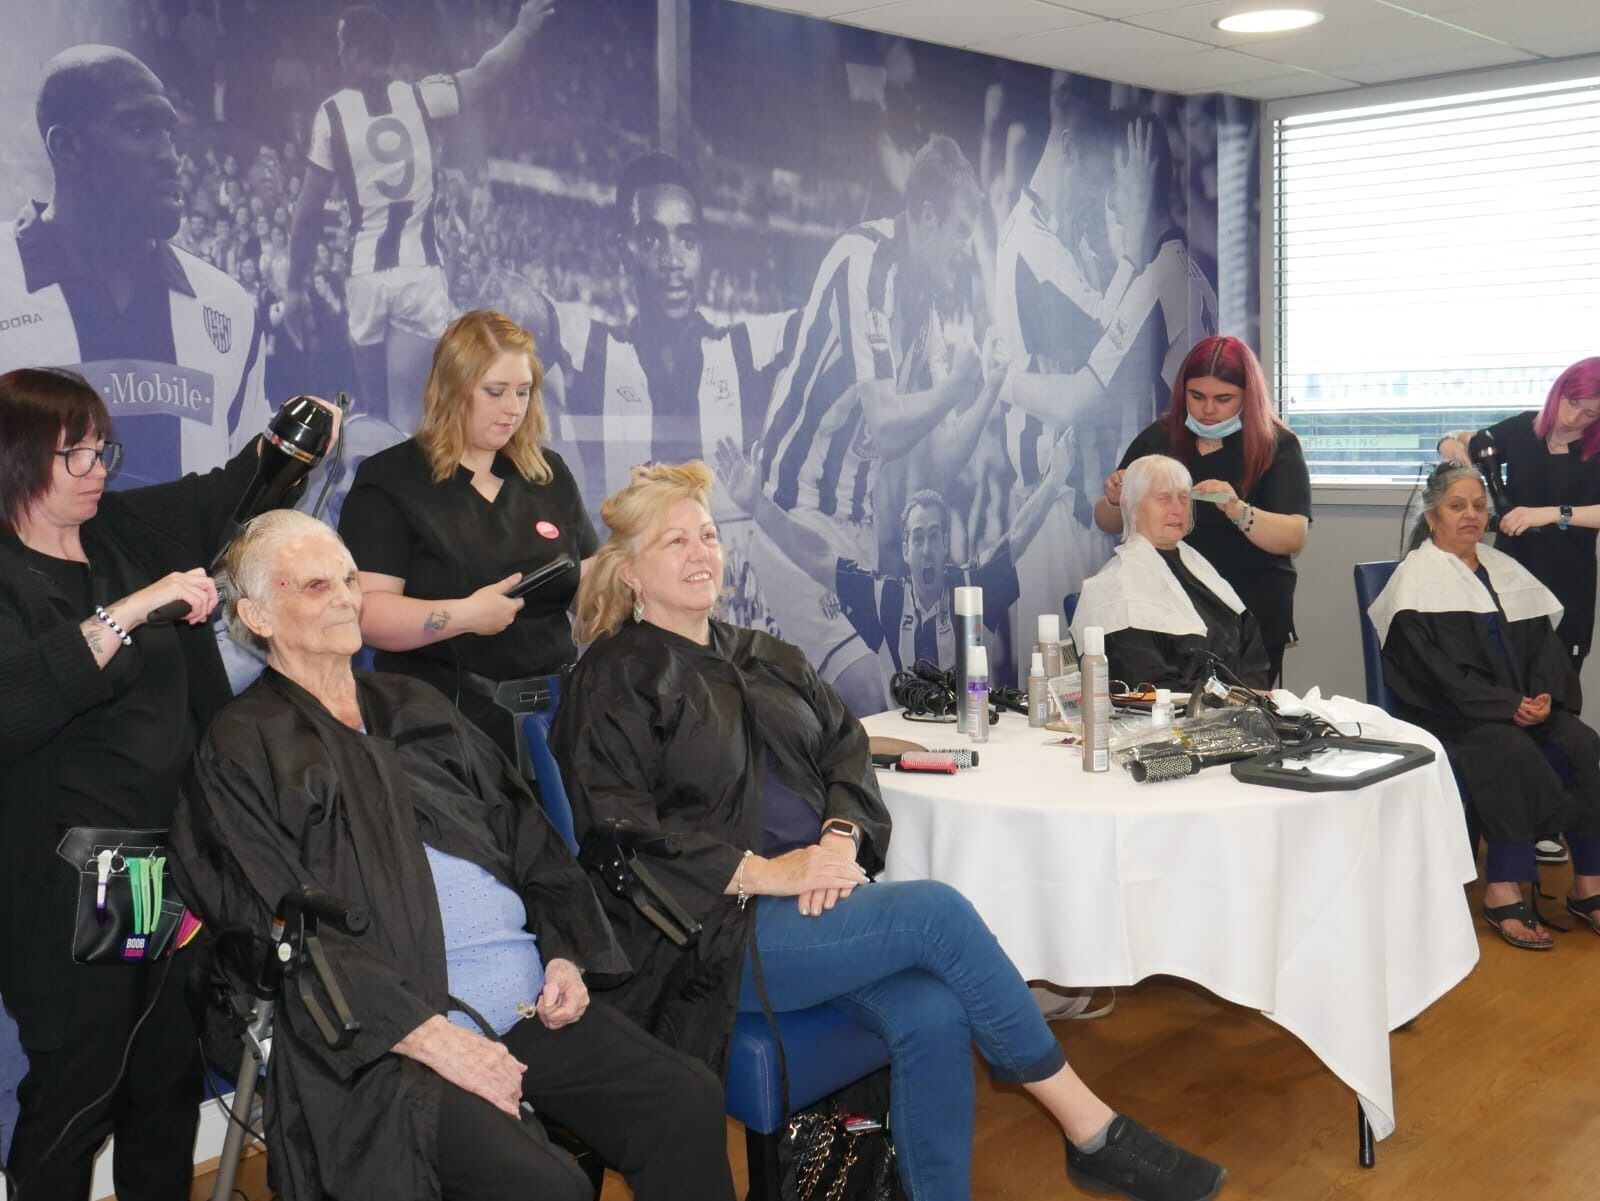 Cancer patients pampered at annual event